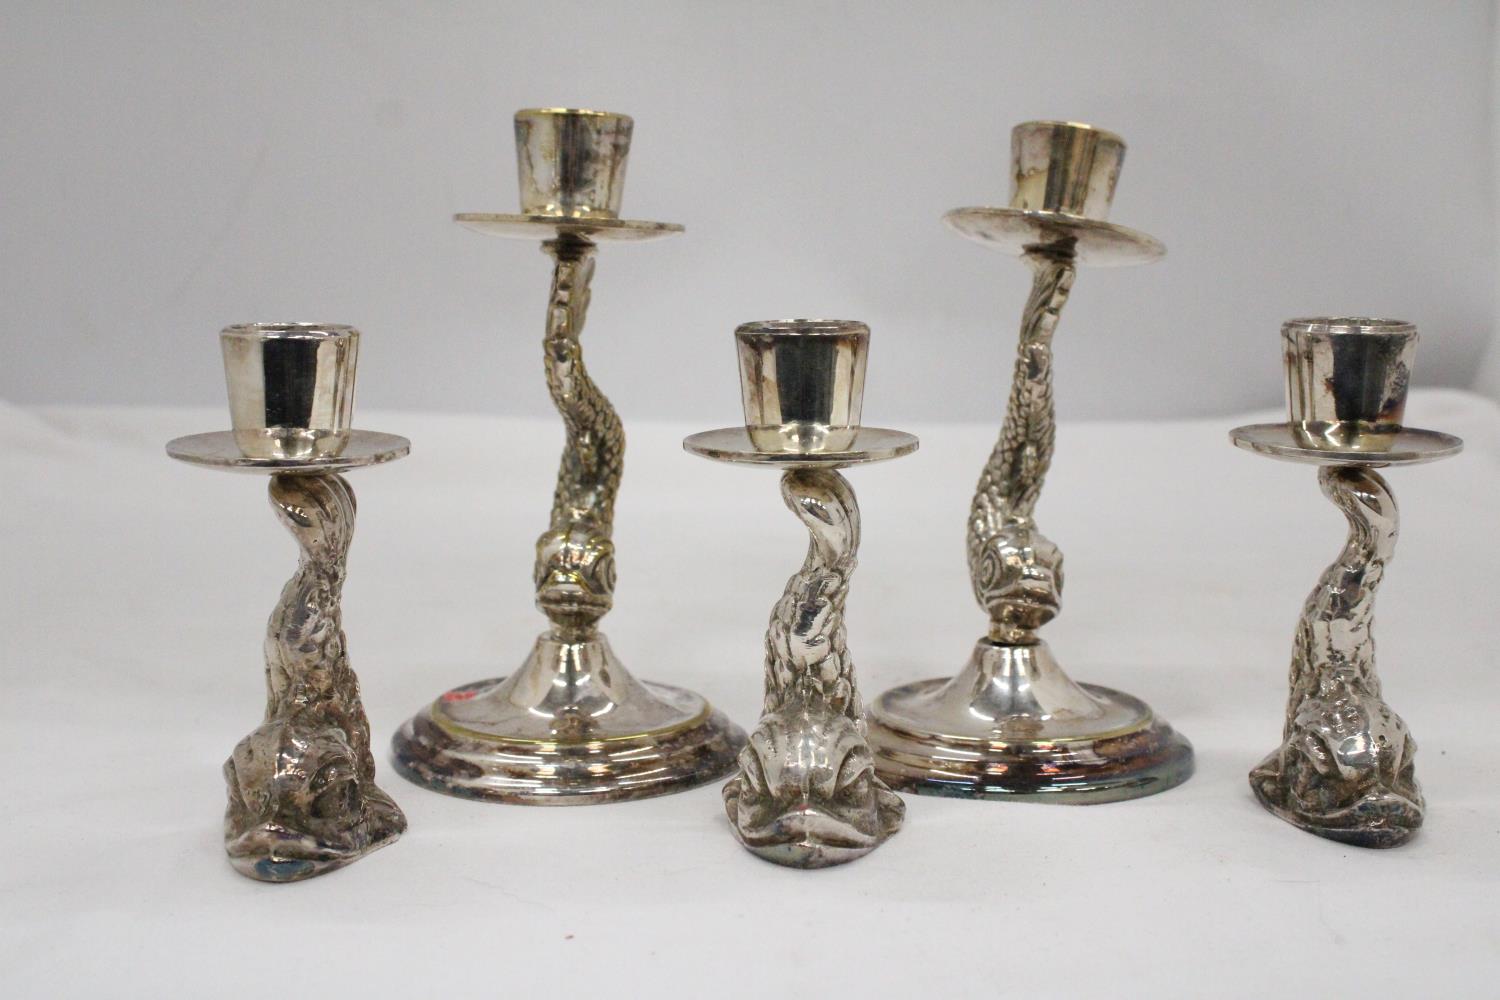 TWO VINTAGE ORNATE SILVER PLATED KOI CARP CANDLE HOLDERS PLUS THREE FURTHER KOI FISH CANDLE STICKS - Image 4 of 7